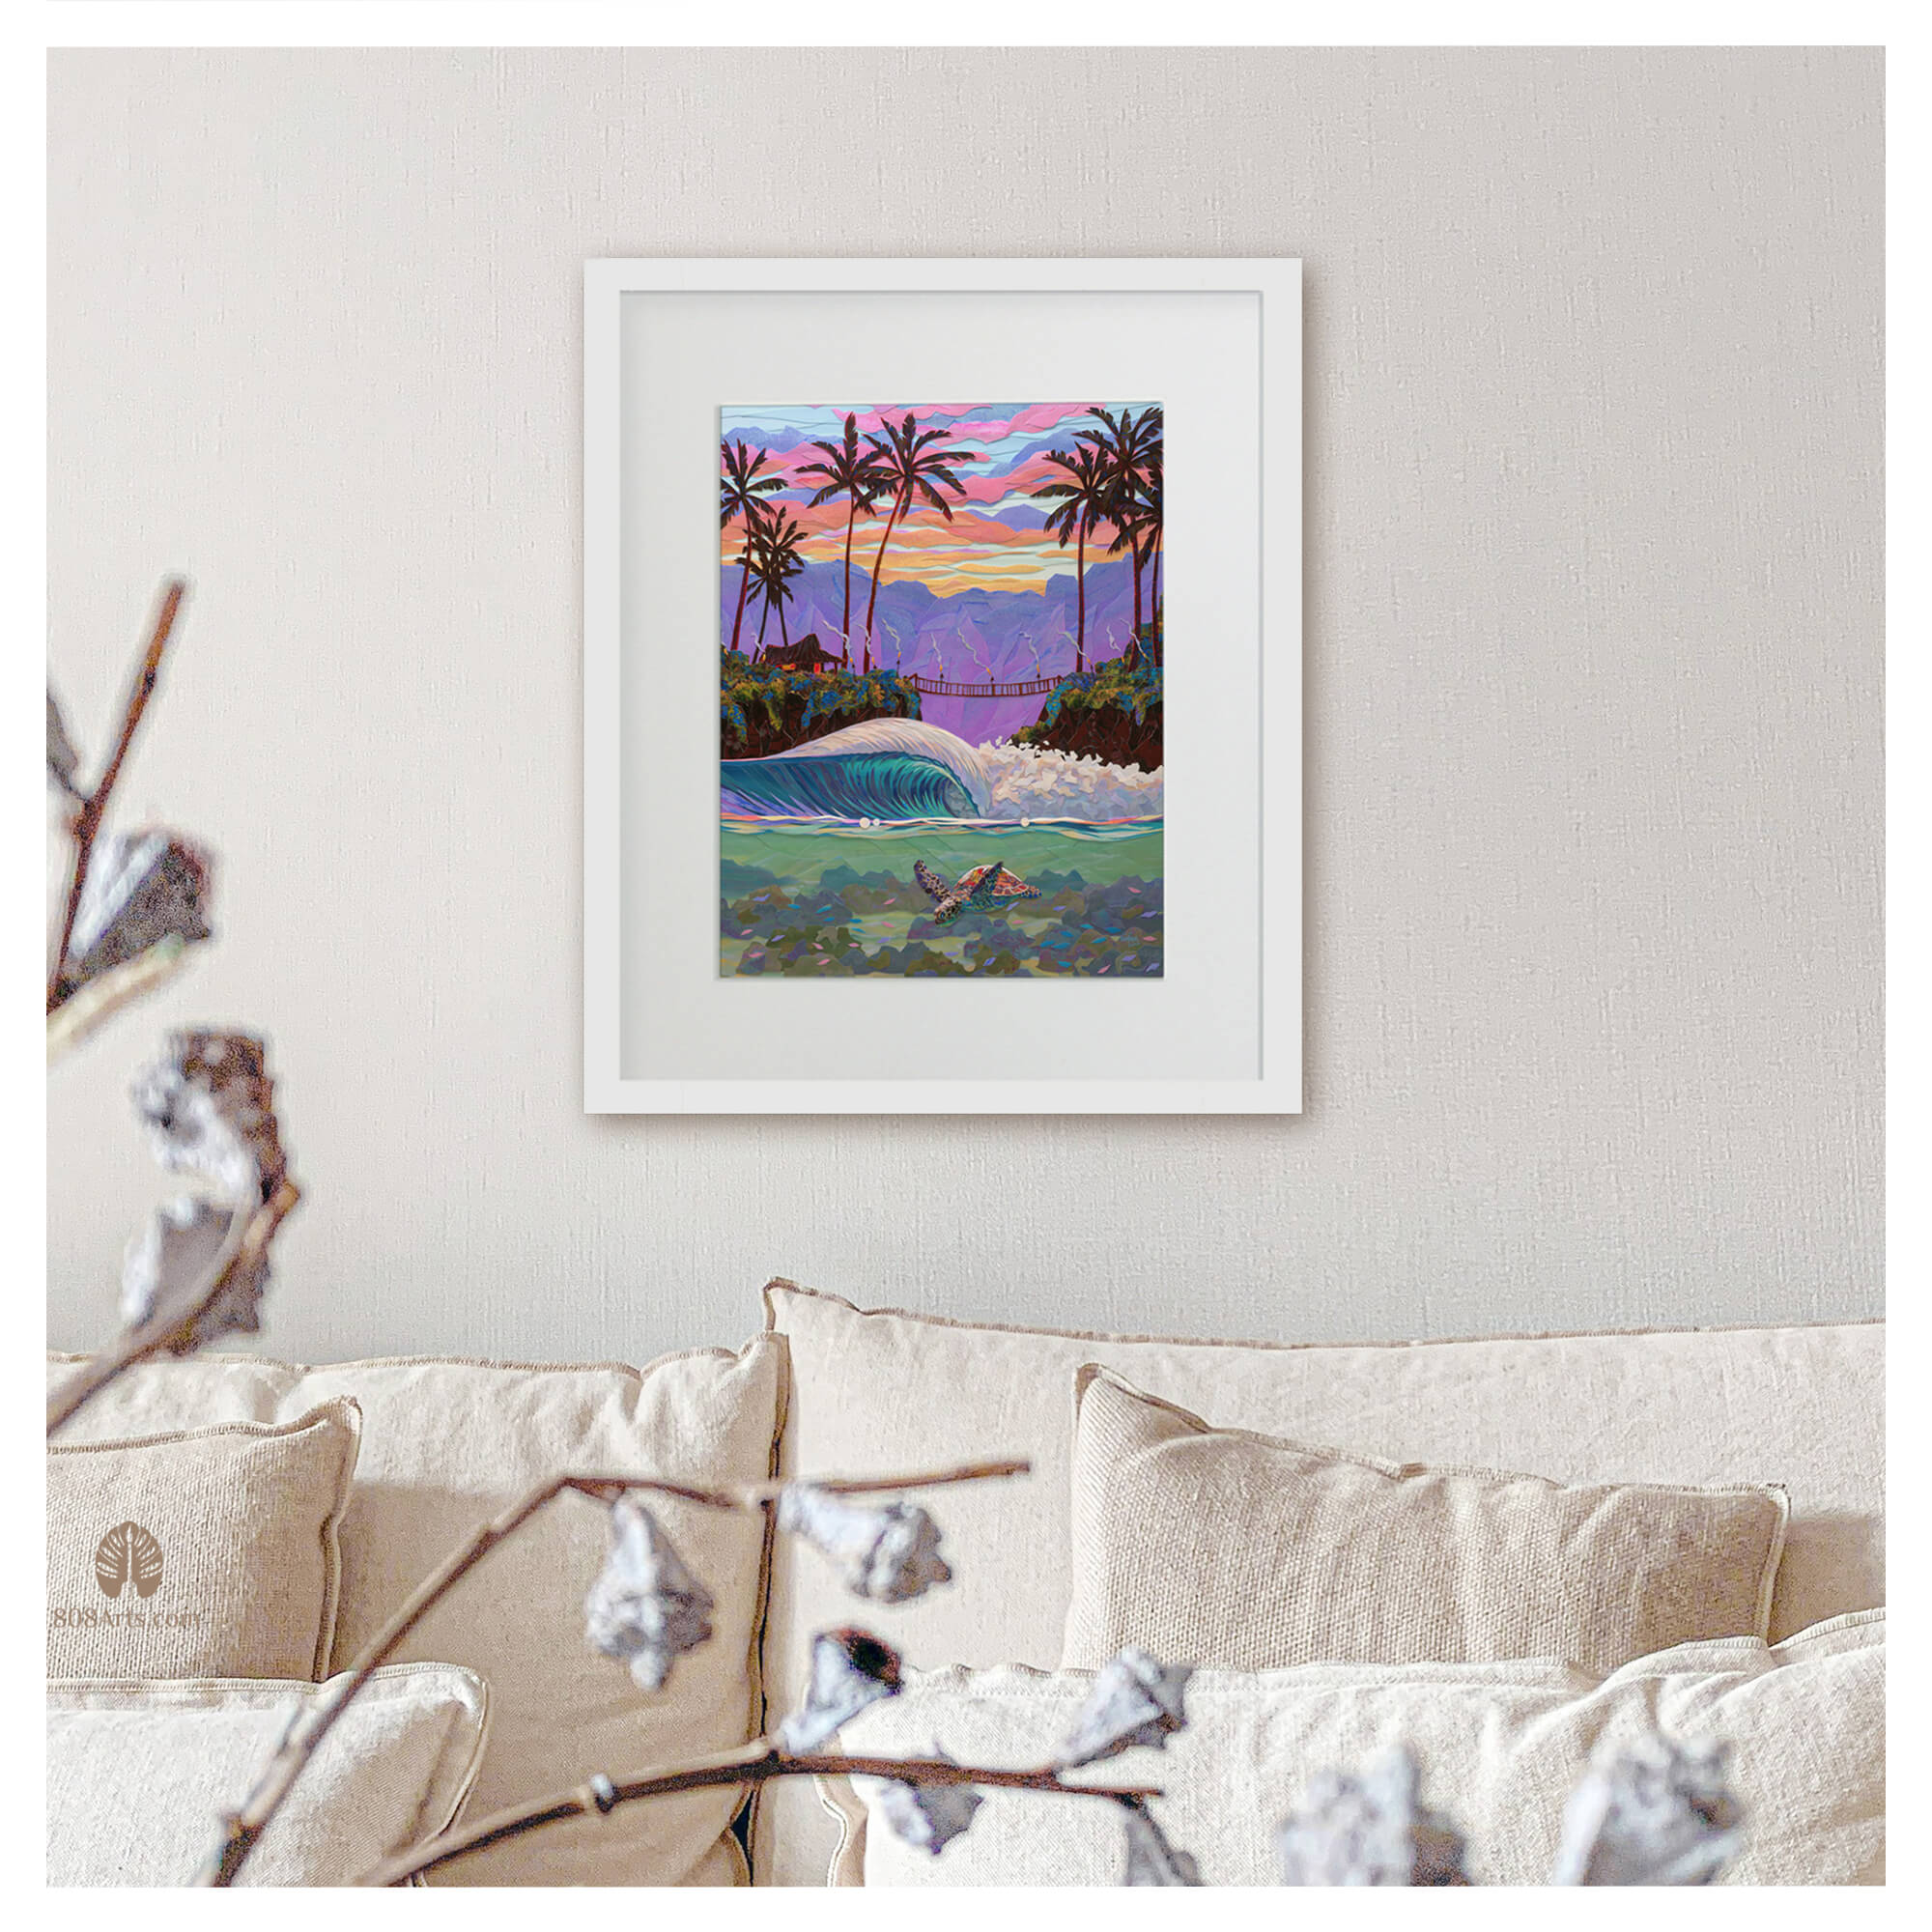 A framed matted art print featuring a collage of a beautiful seascape with a sea turtle swimming, a hut, and a gradient purple-pink-hued mountain background by Hawaii artist Patrick Parker